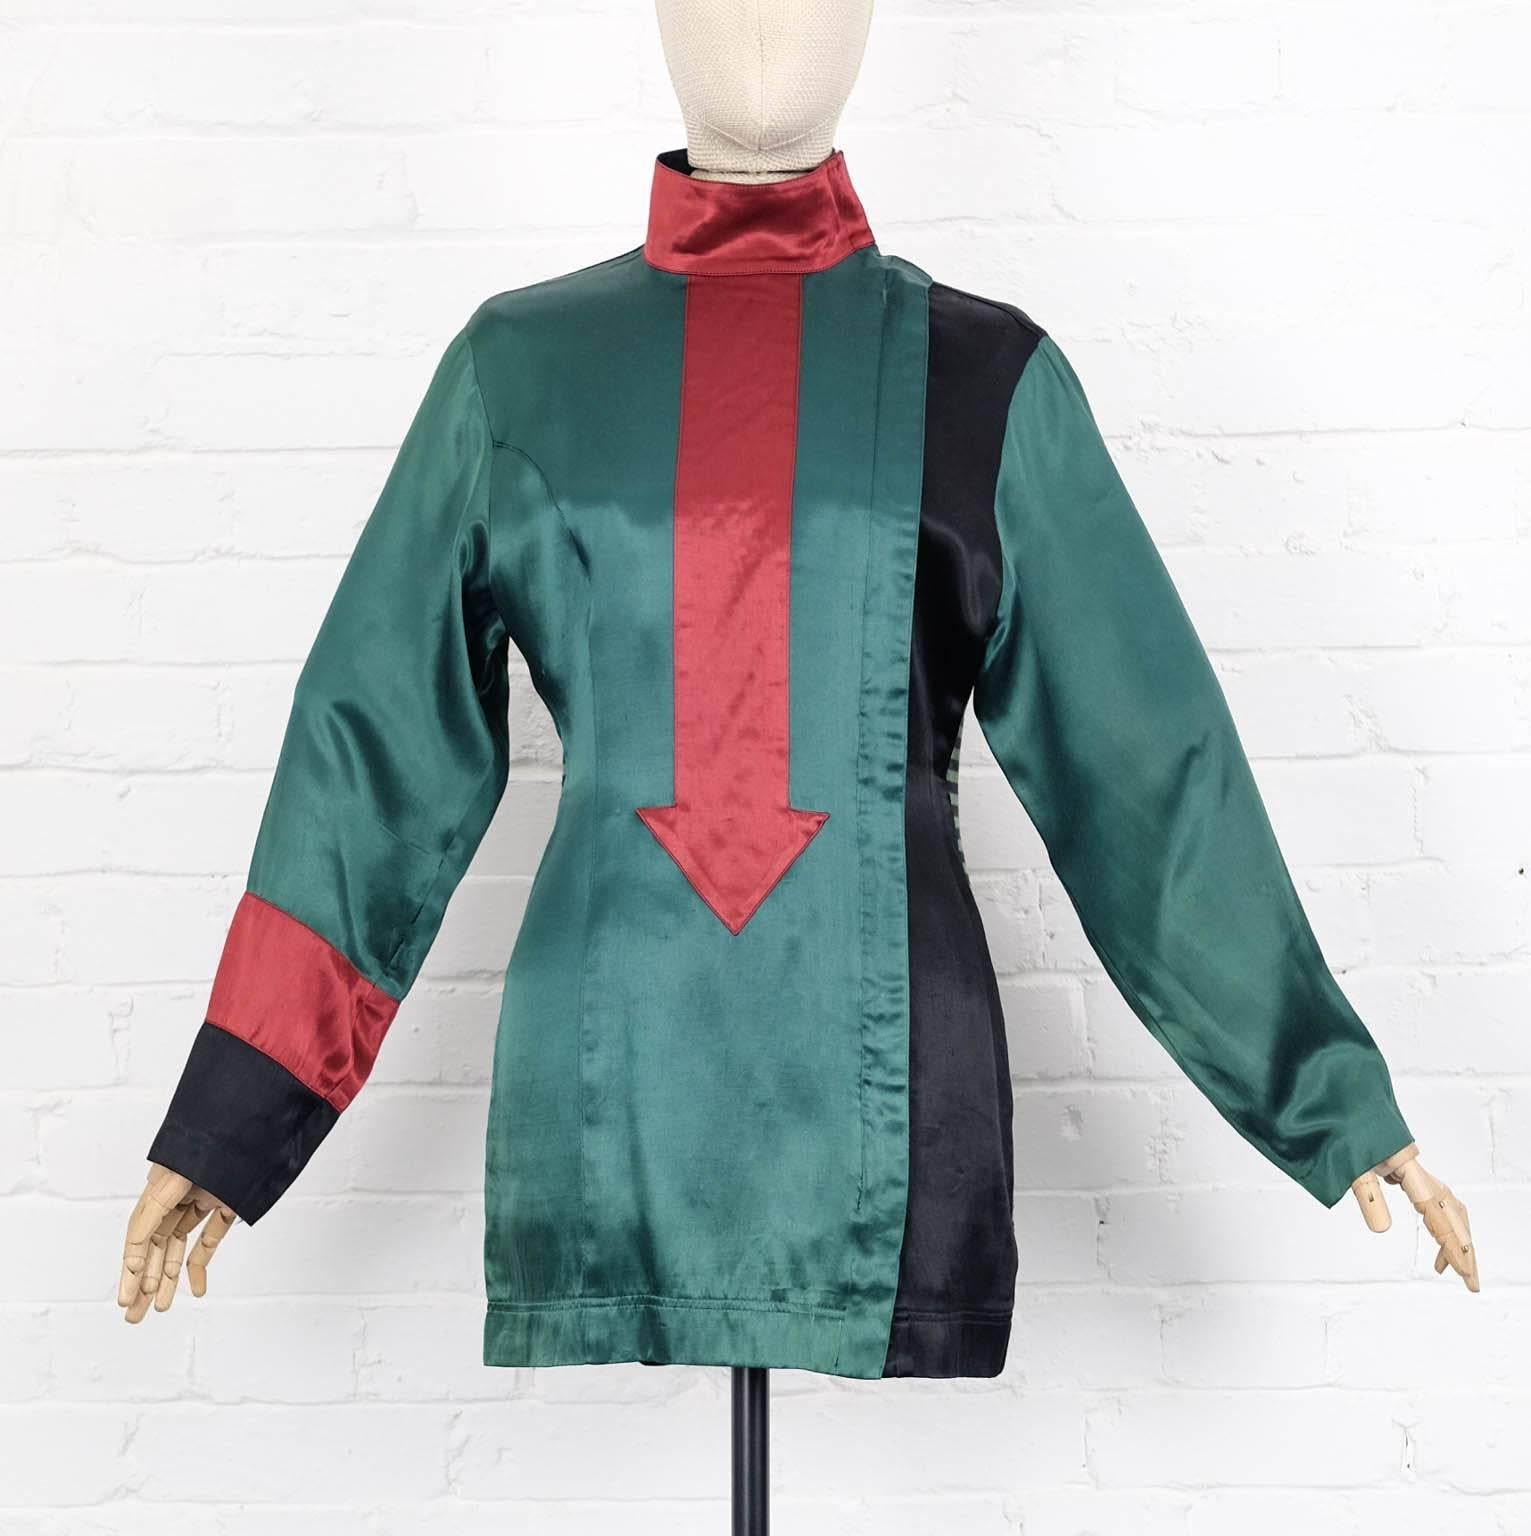 Green, black and burgundy cotton blend arrow appliqué long top from Jean Paul Gaultier Vintage featuring a funnel neck, a velcro fastening, a concealed zip fastening, long sleeves, contrasting panels and a straight hem. 

1986/87 Jean Paul Gaultier